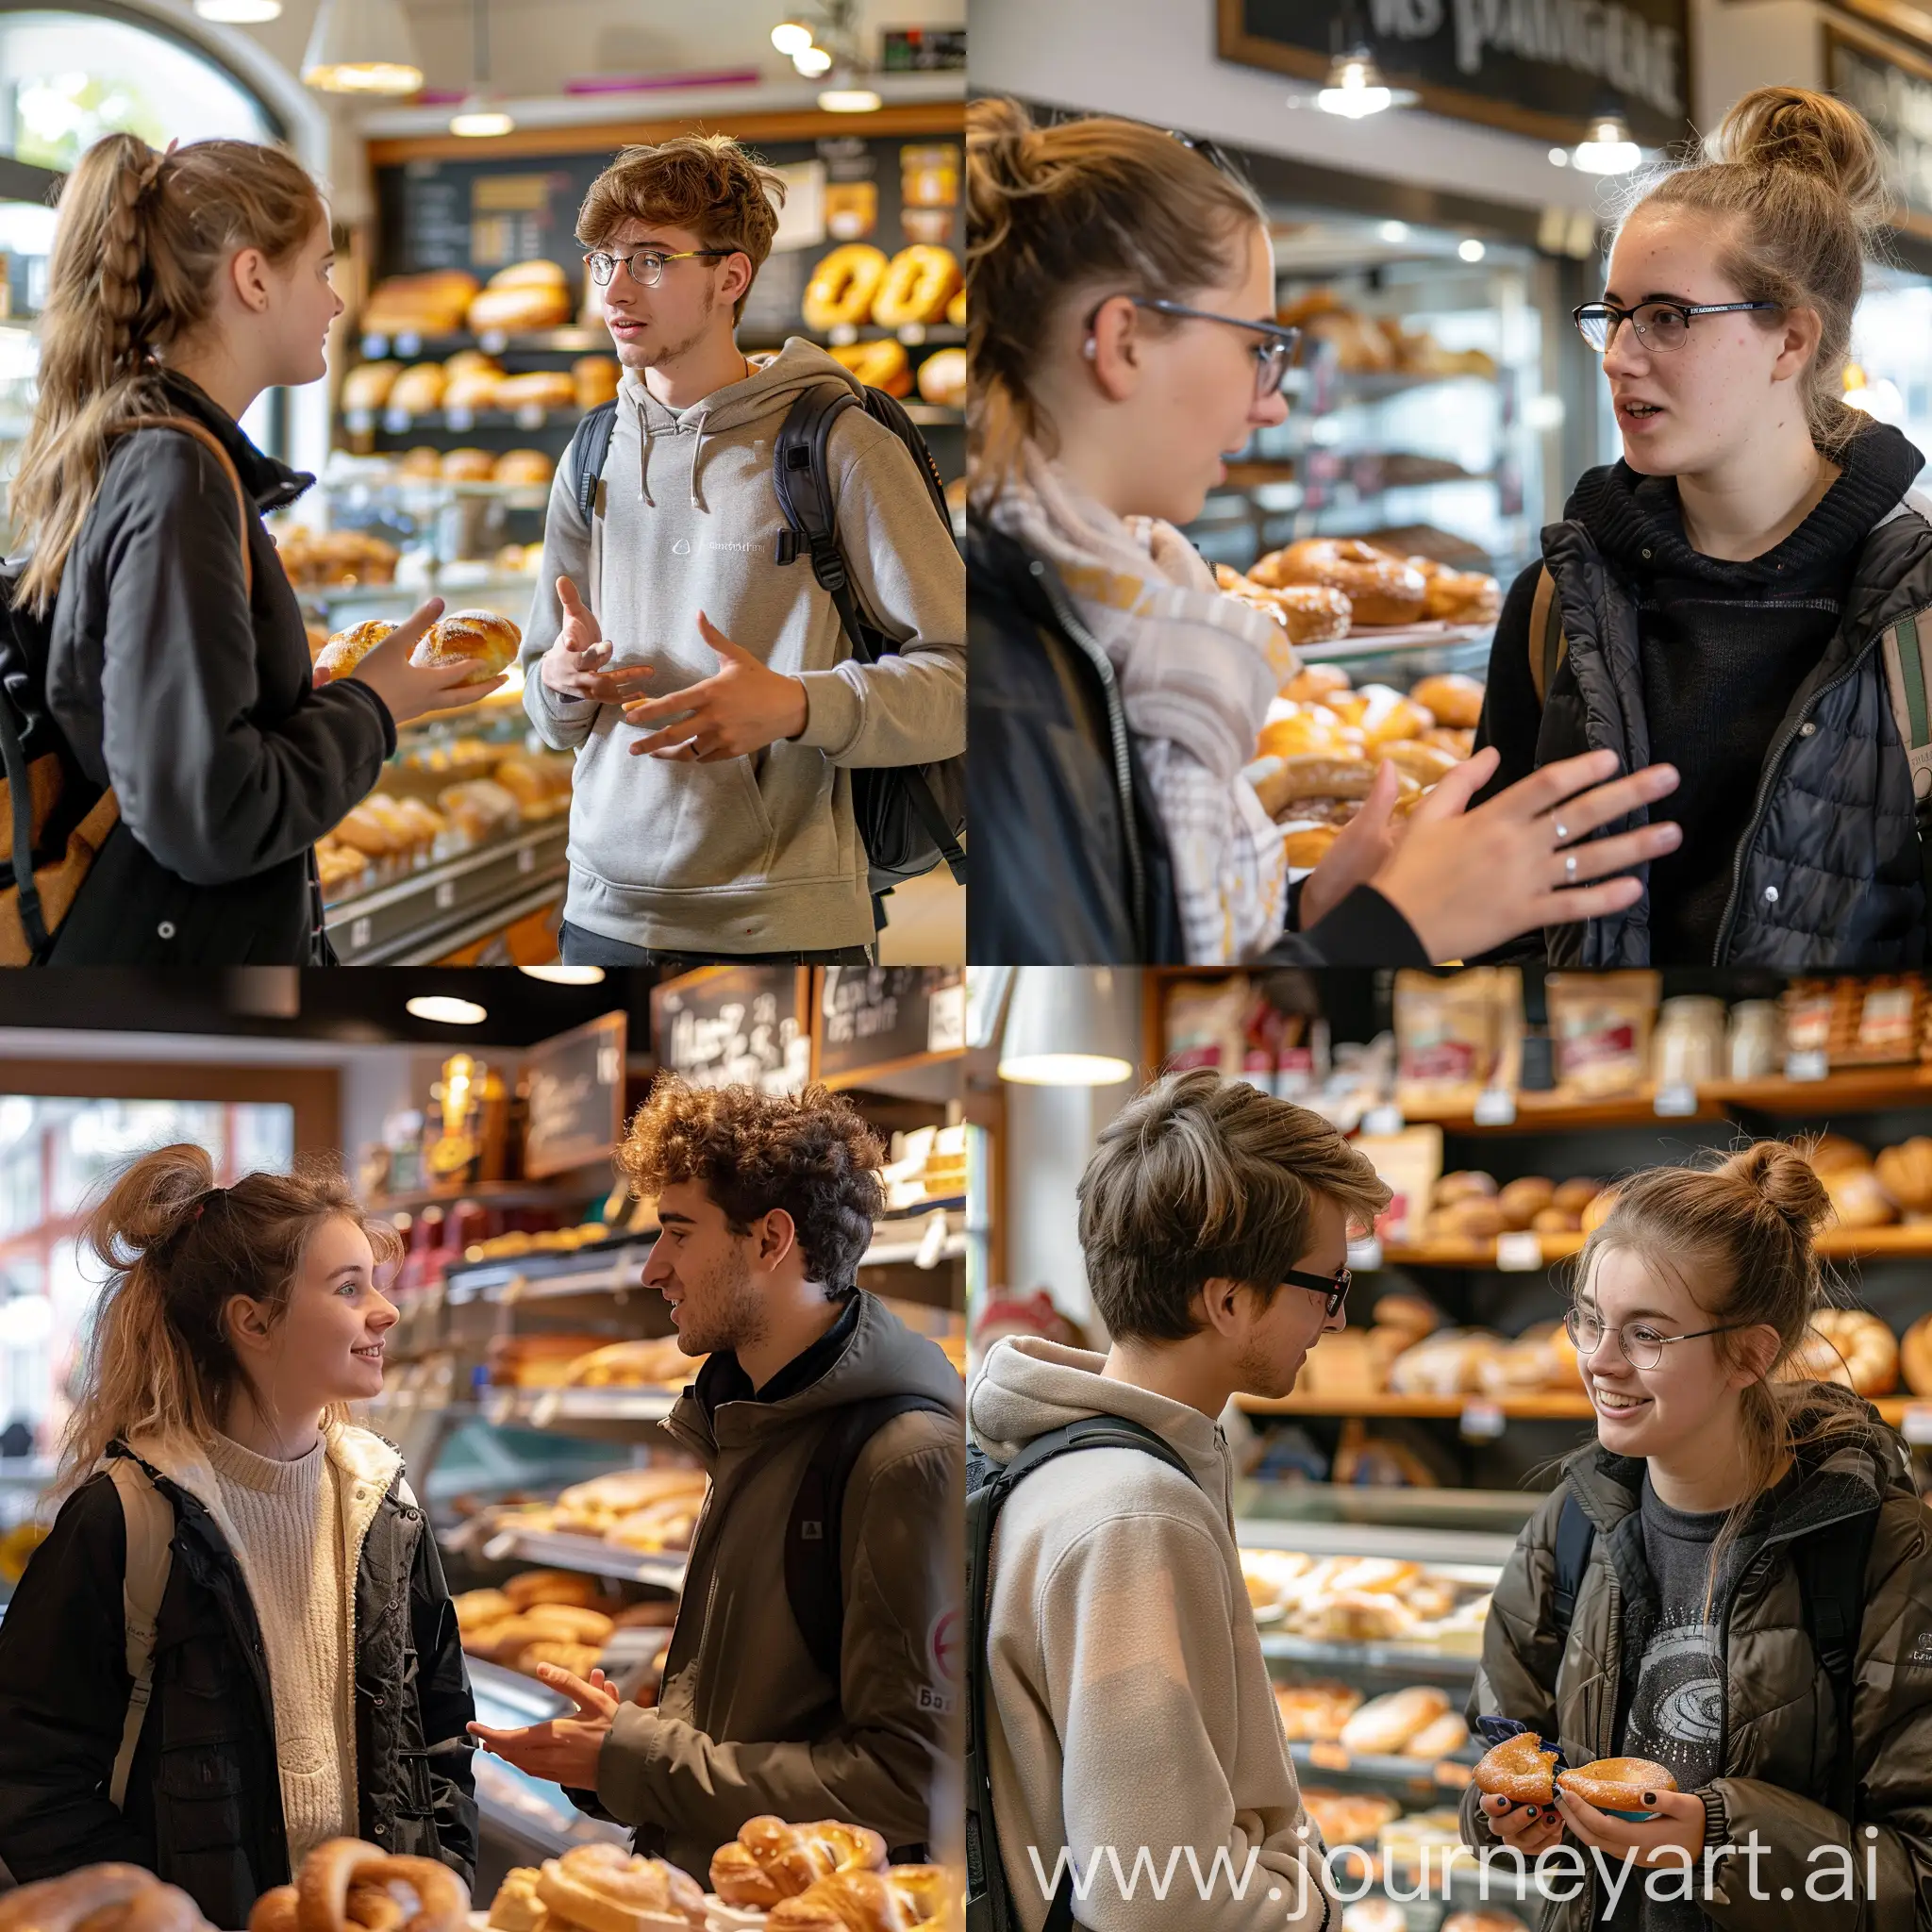 two germanian students speaking in a bakery